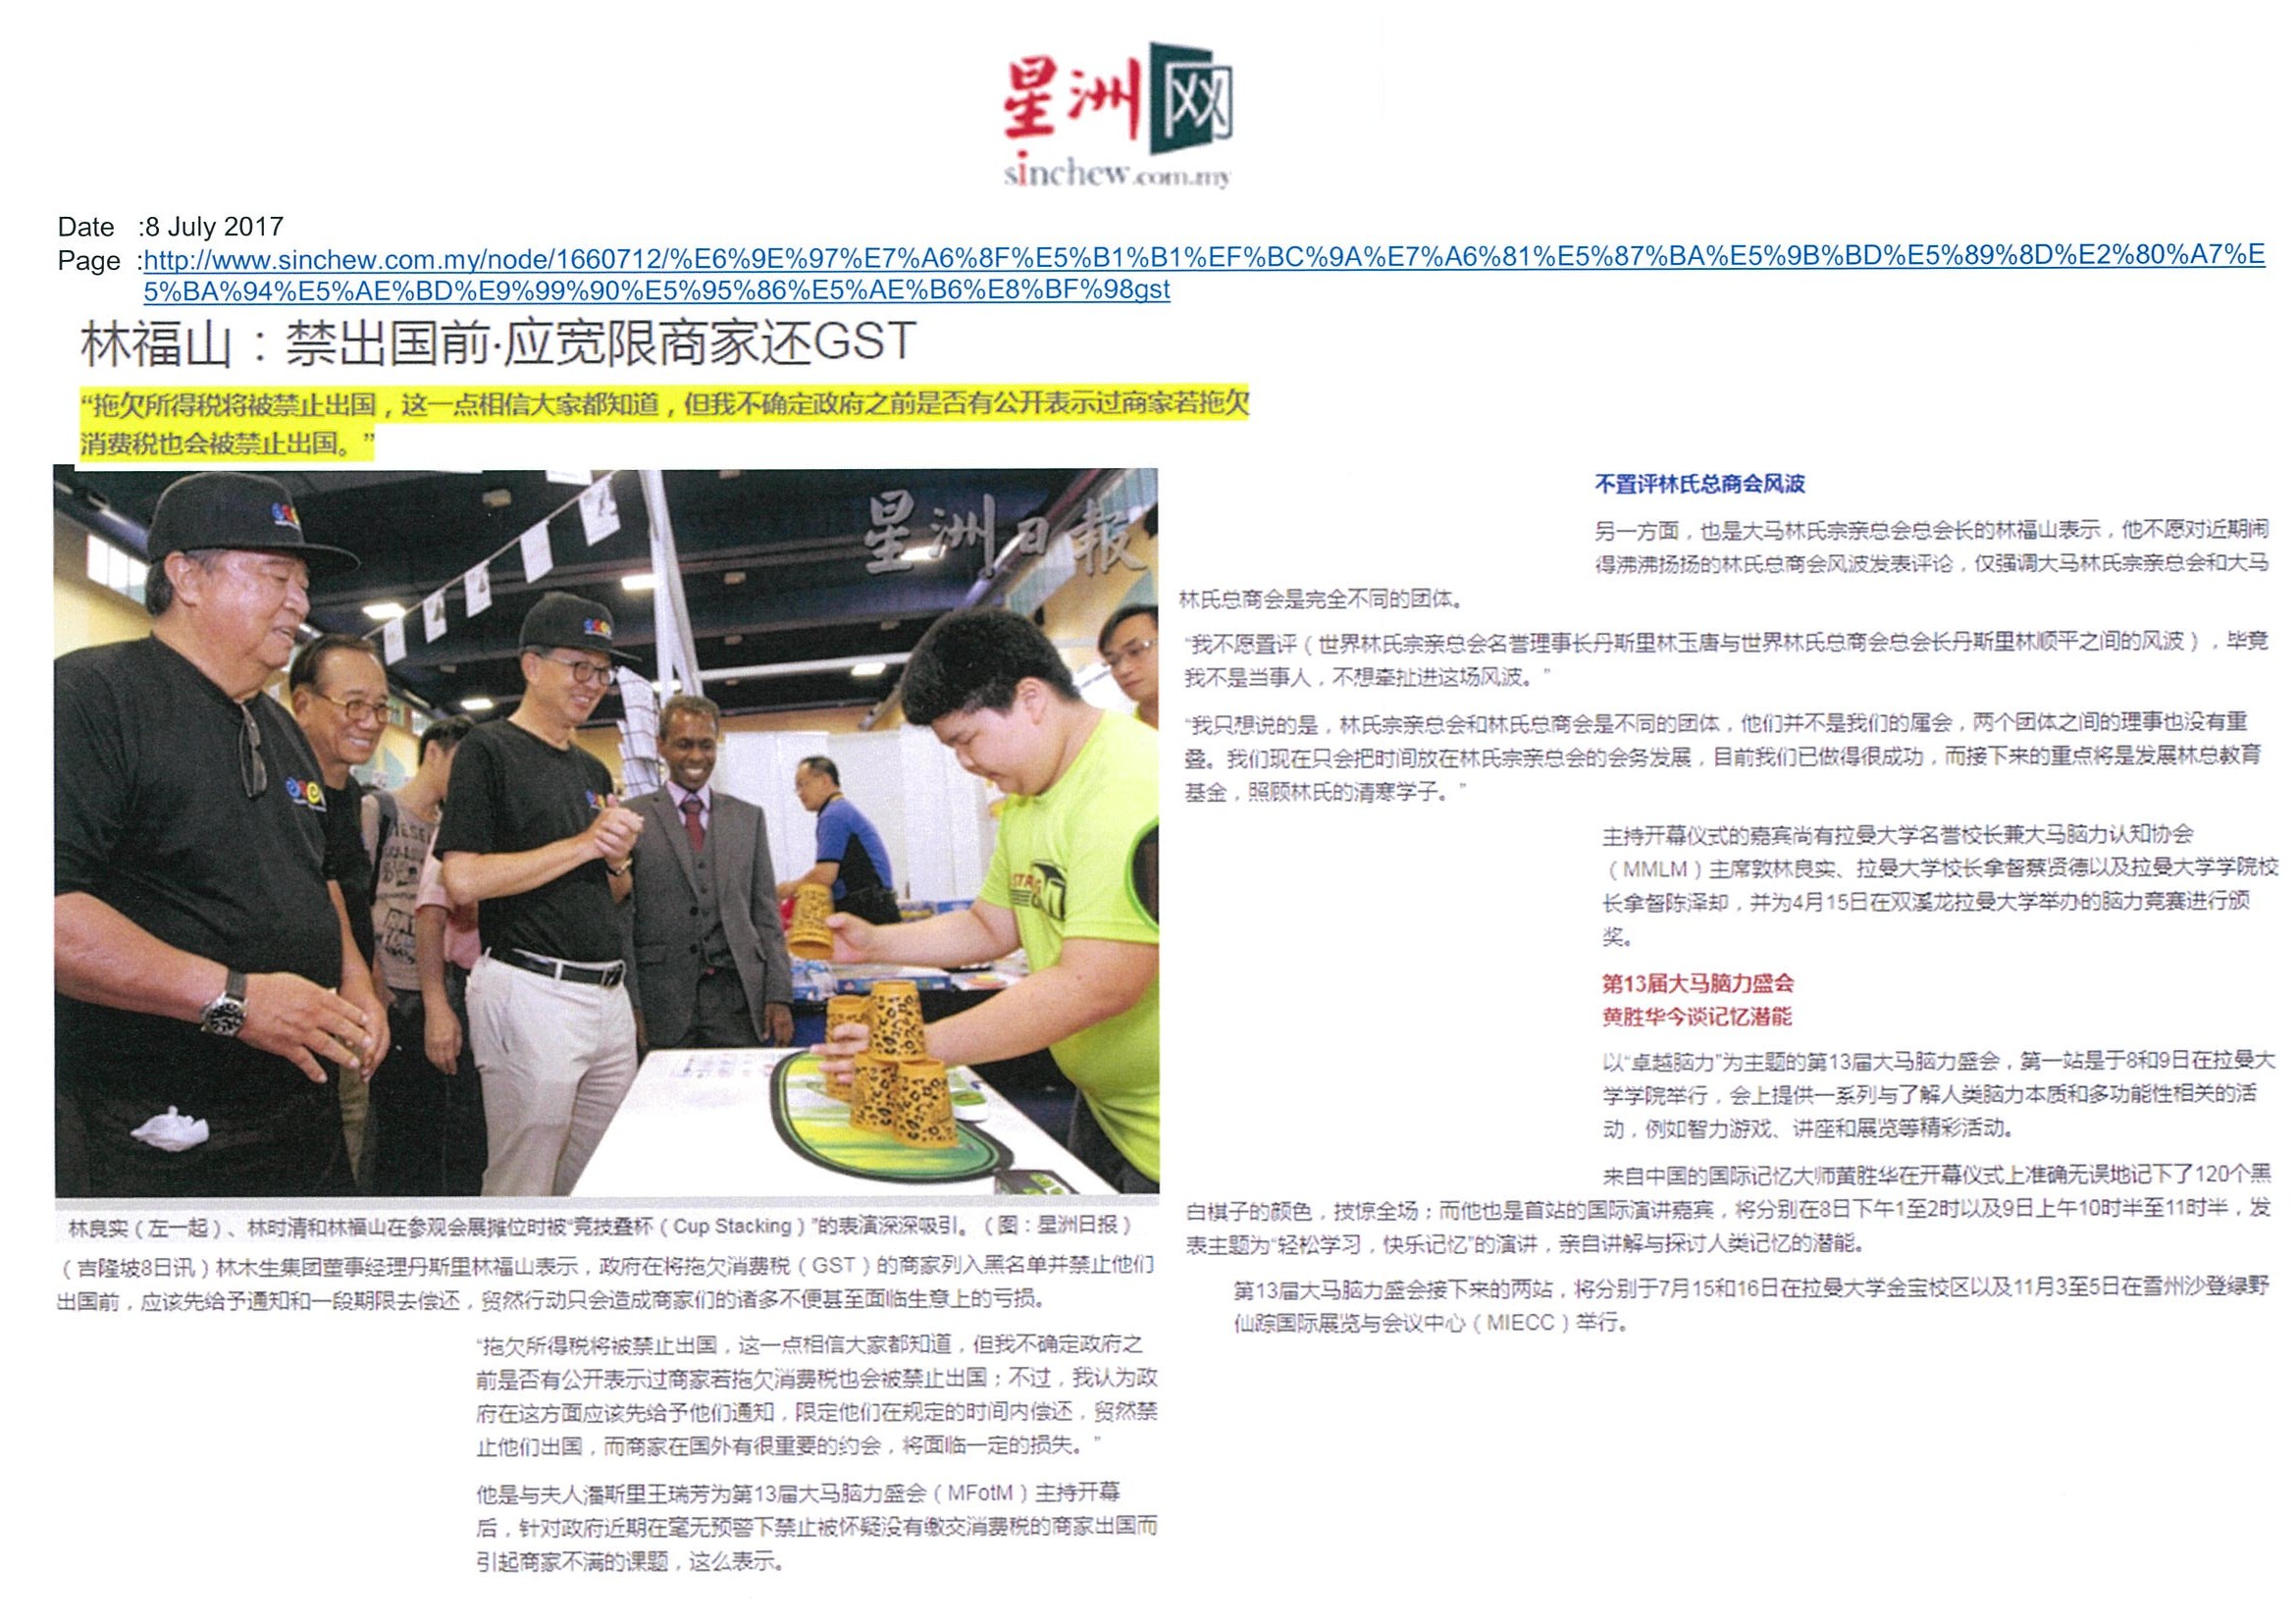 2017.07.08 Sin Chew Online – Should extend the time limit for businesses to repay GST stated Lim Hock San